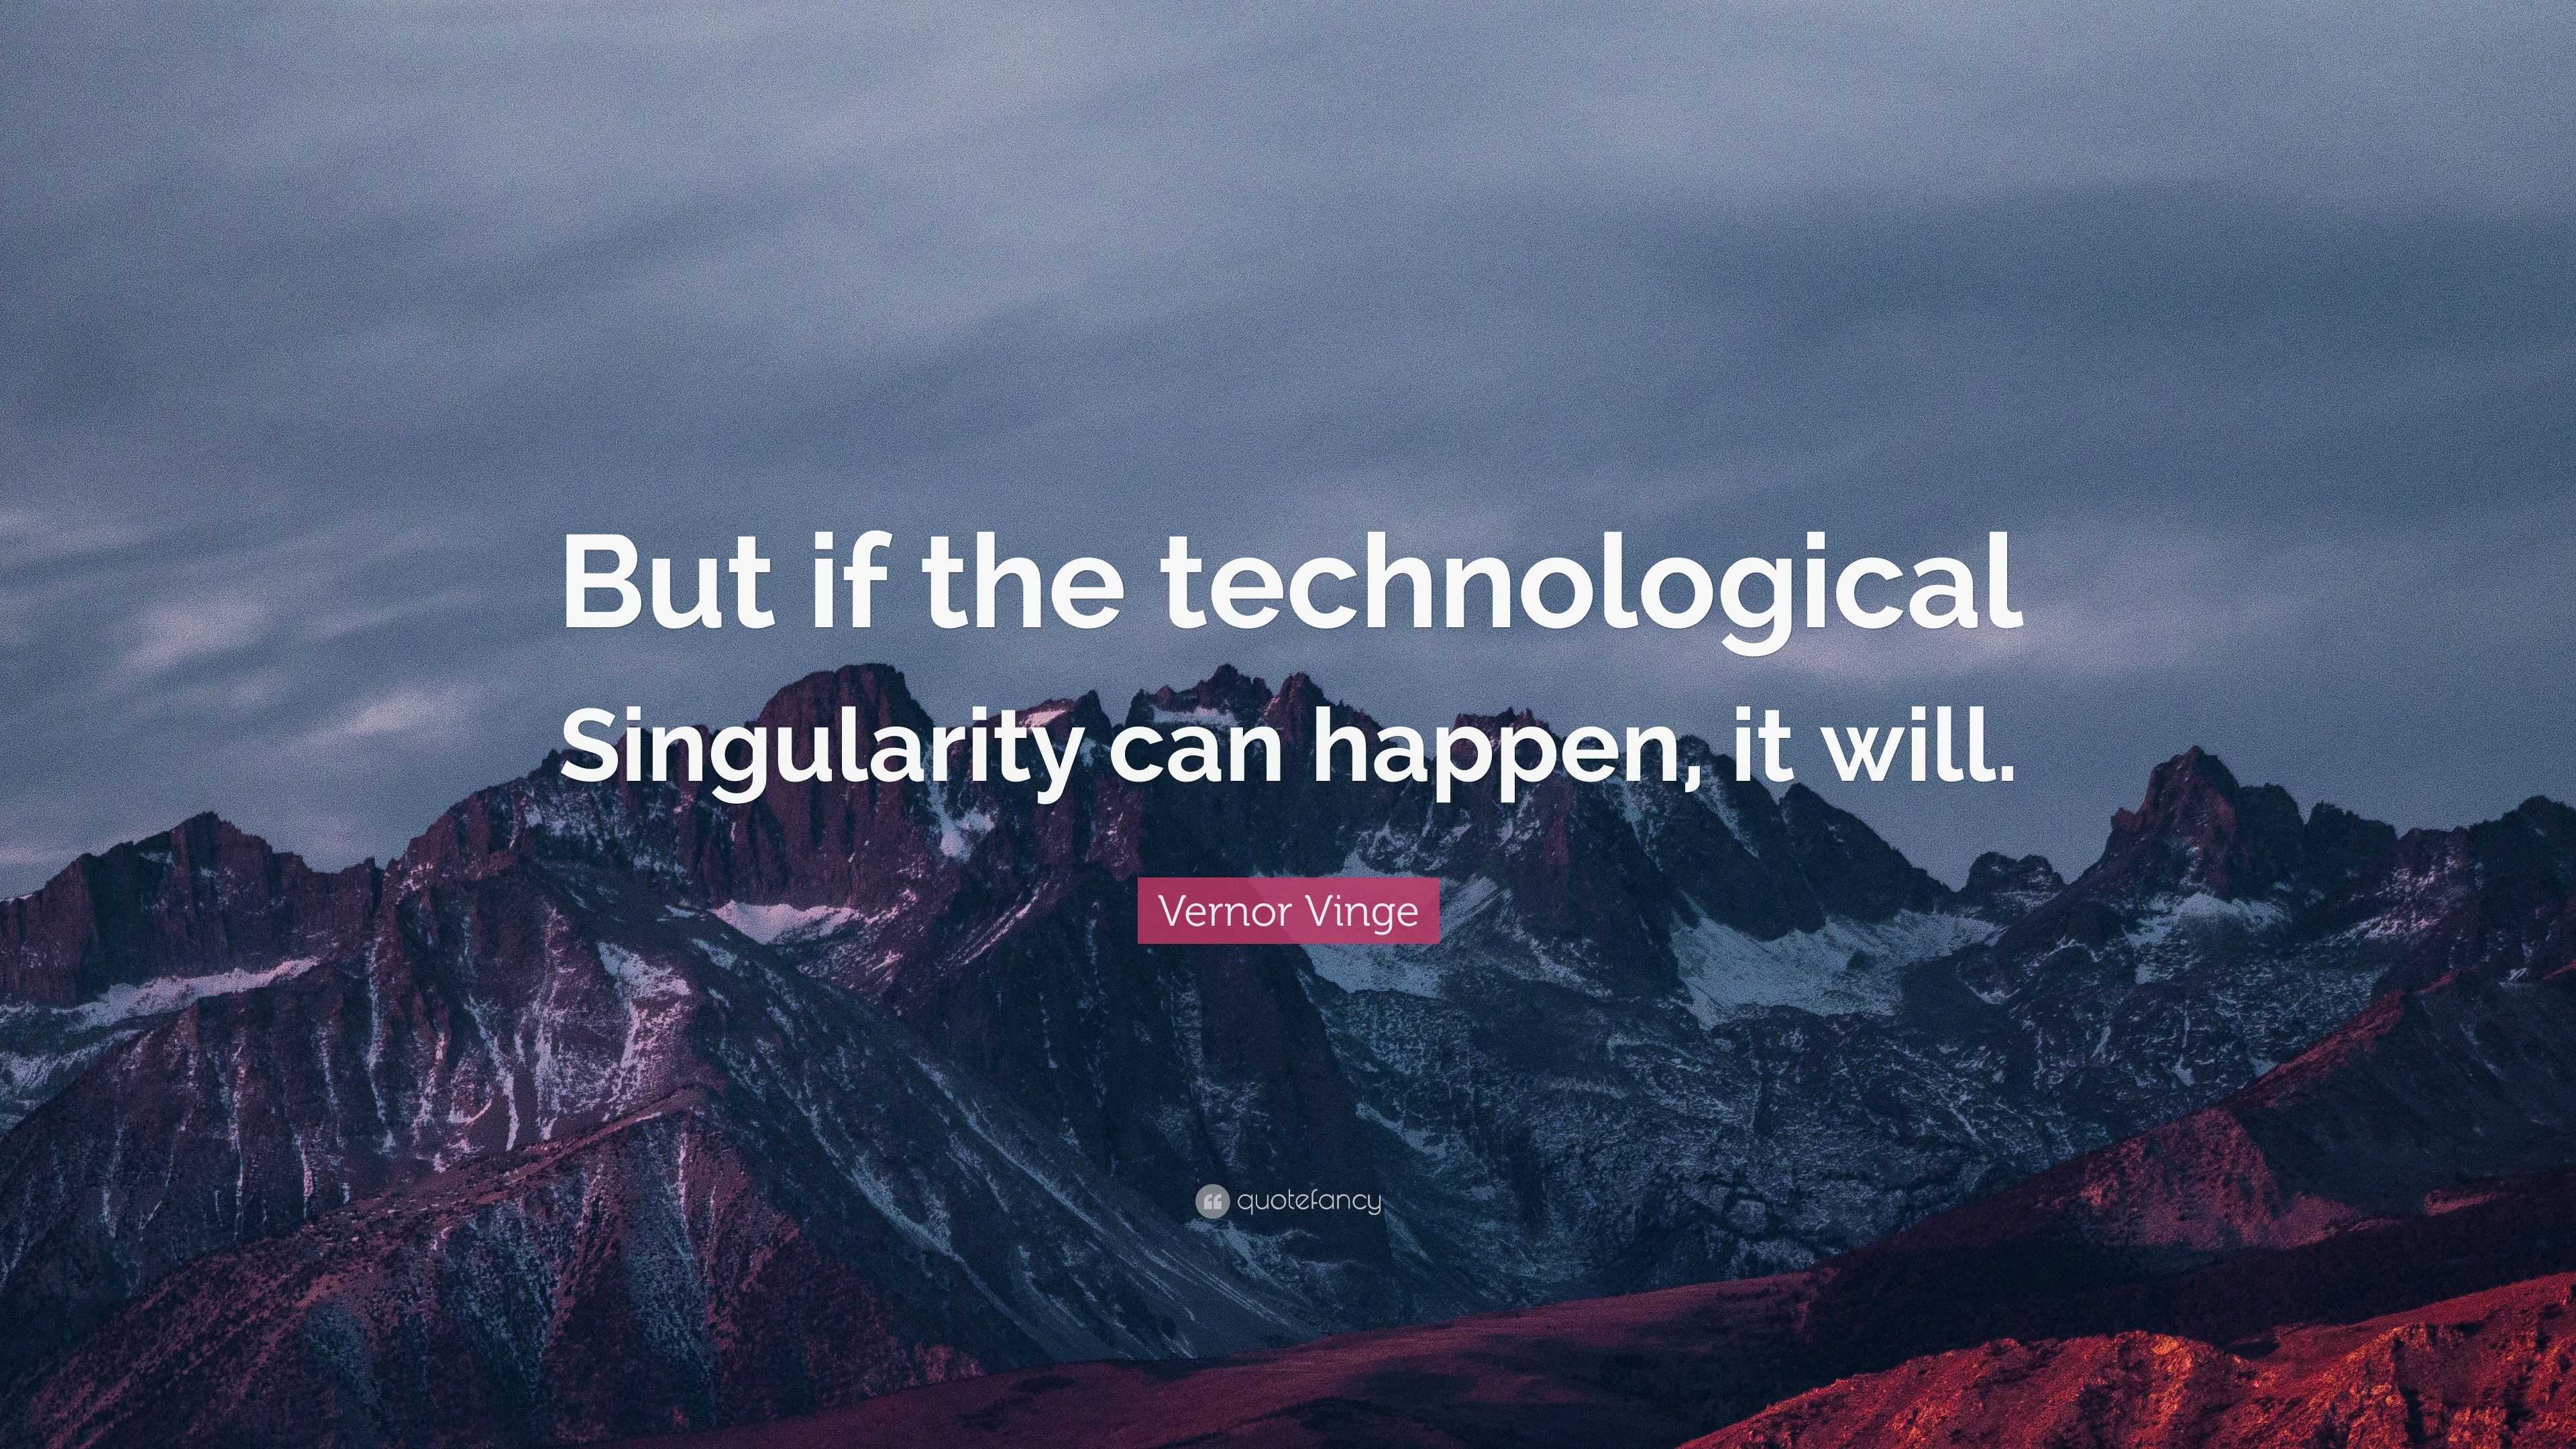 https://quotefancy.com/media/wallpaper/3840x2160/3133092-Vernor-Vinge-Quote-But-if-the-technological-Singularity-can-happen.jpg